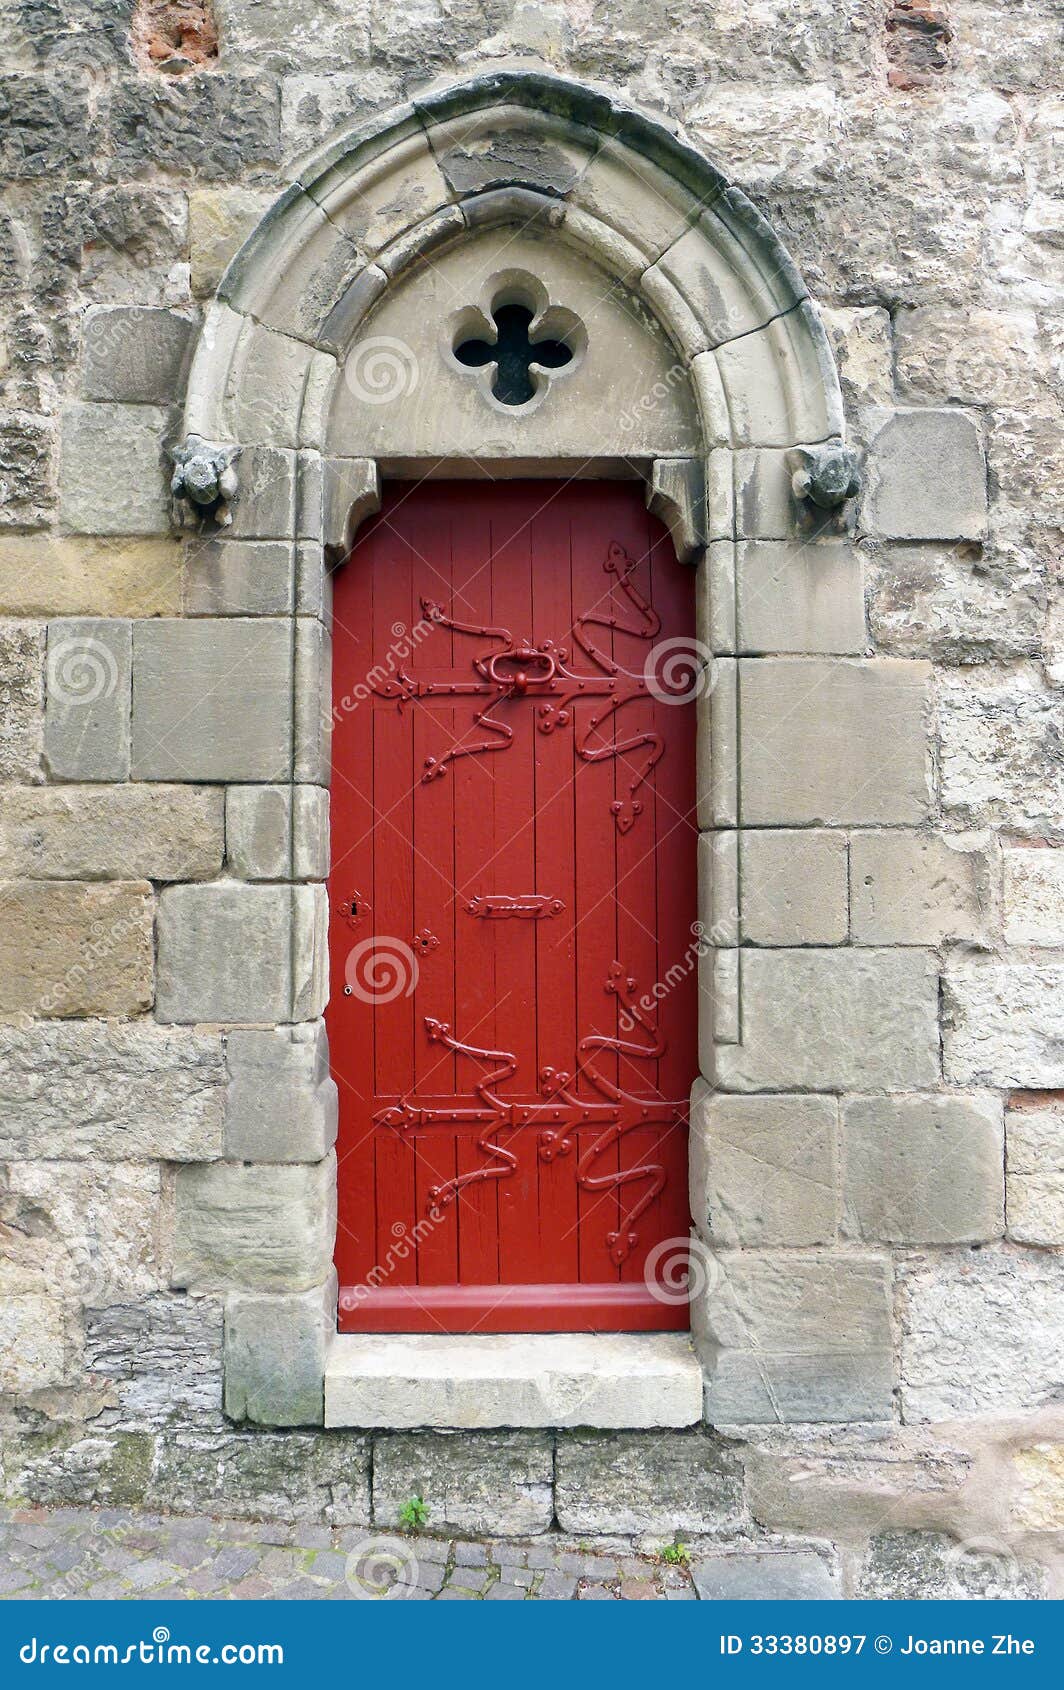 ancient medieval french castle door